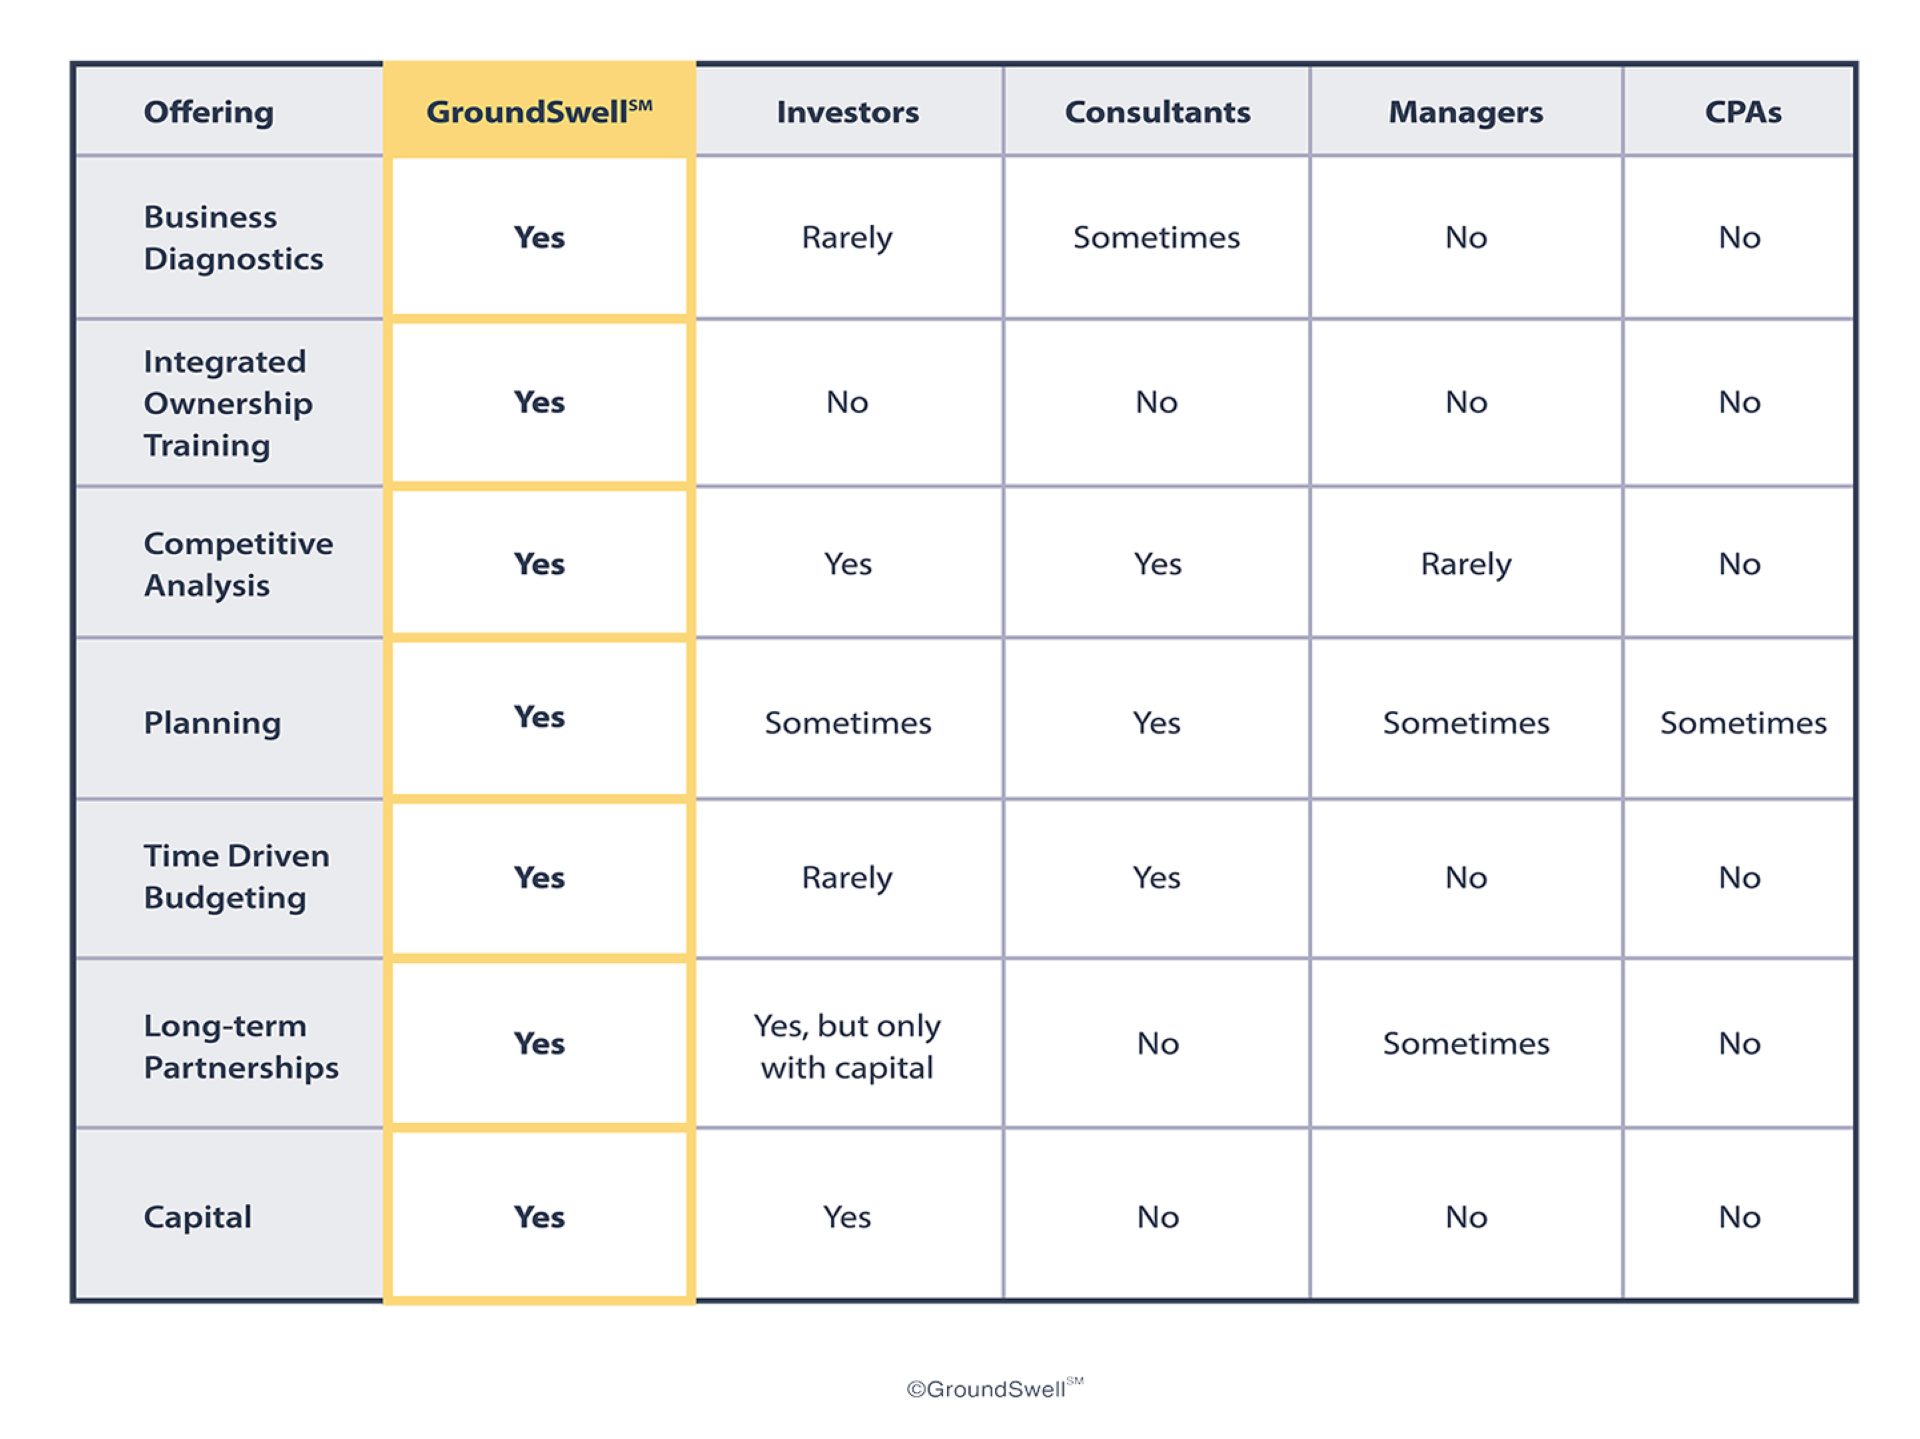 Image of a table that describes how GroundSwell's offerings are different than offerings from investors, consultants, managers, or CPAs